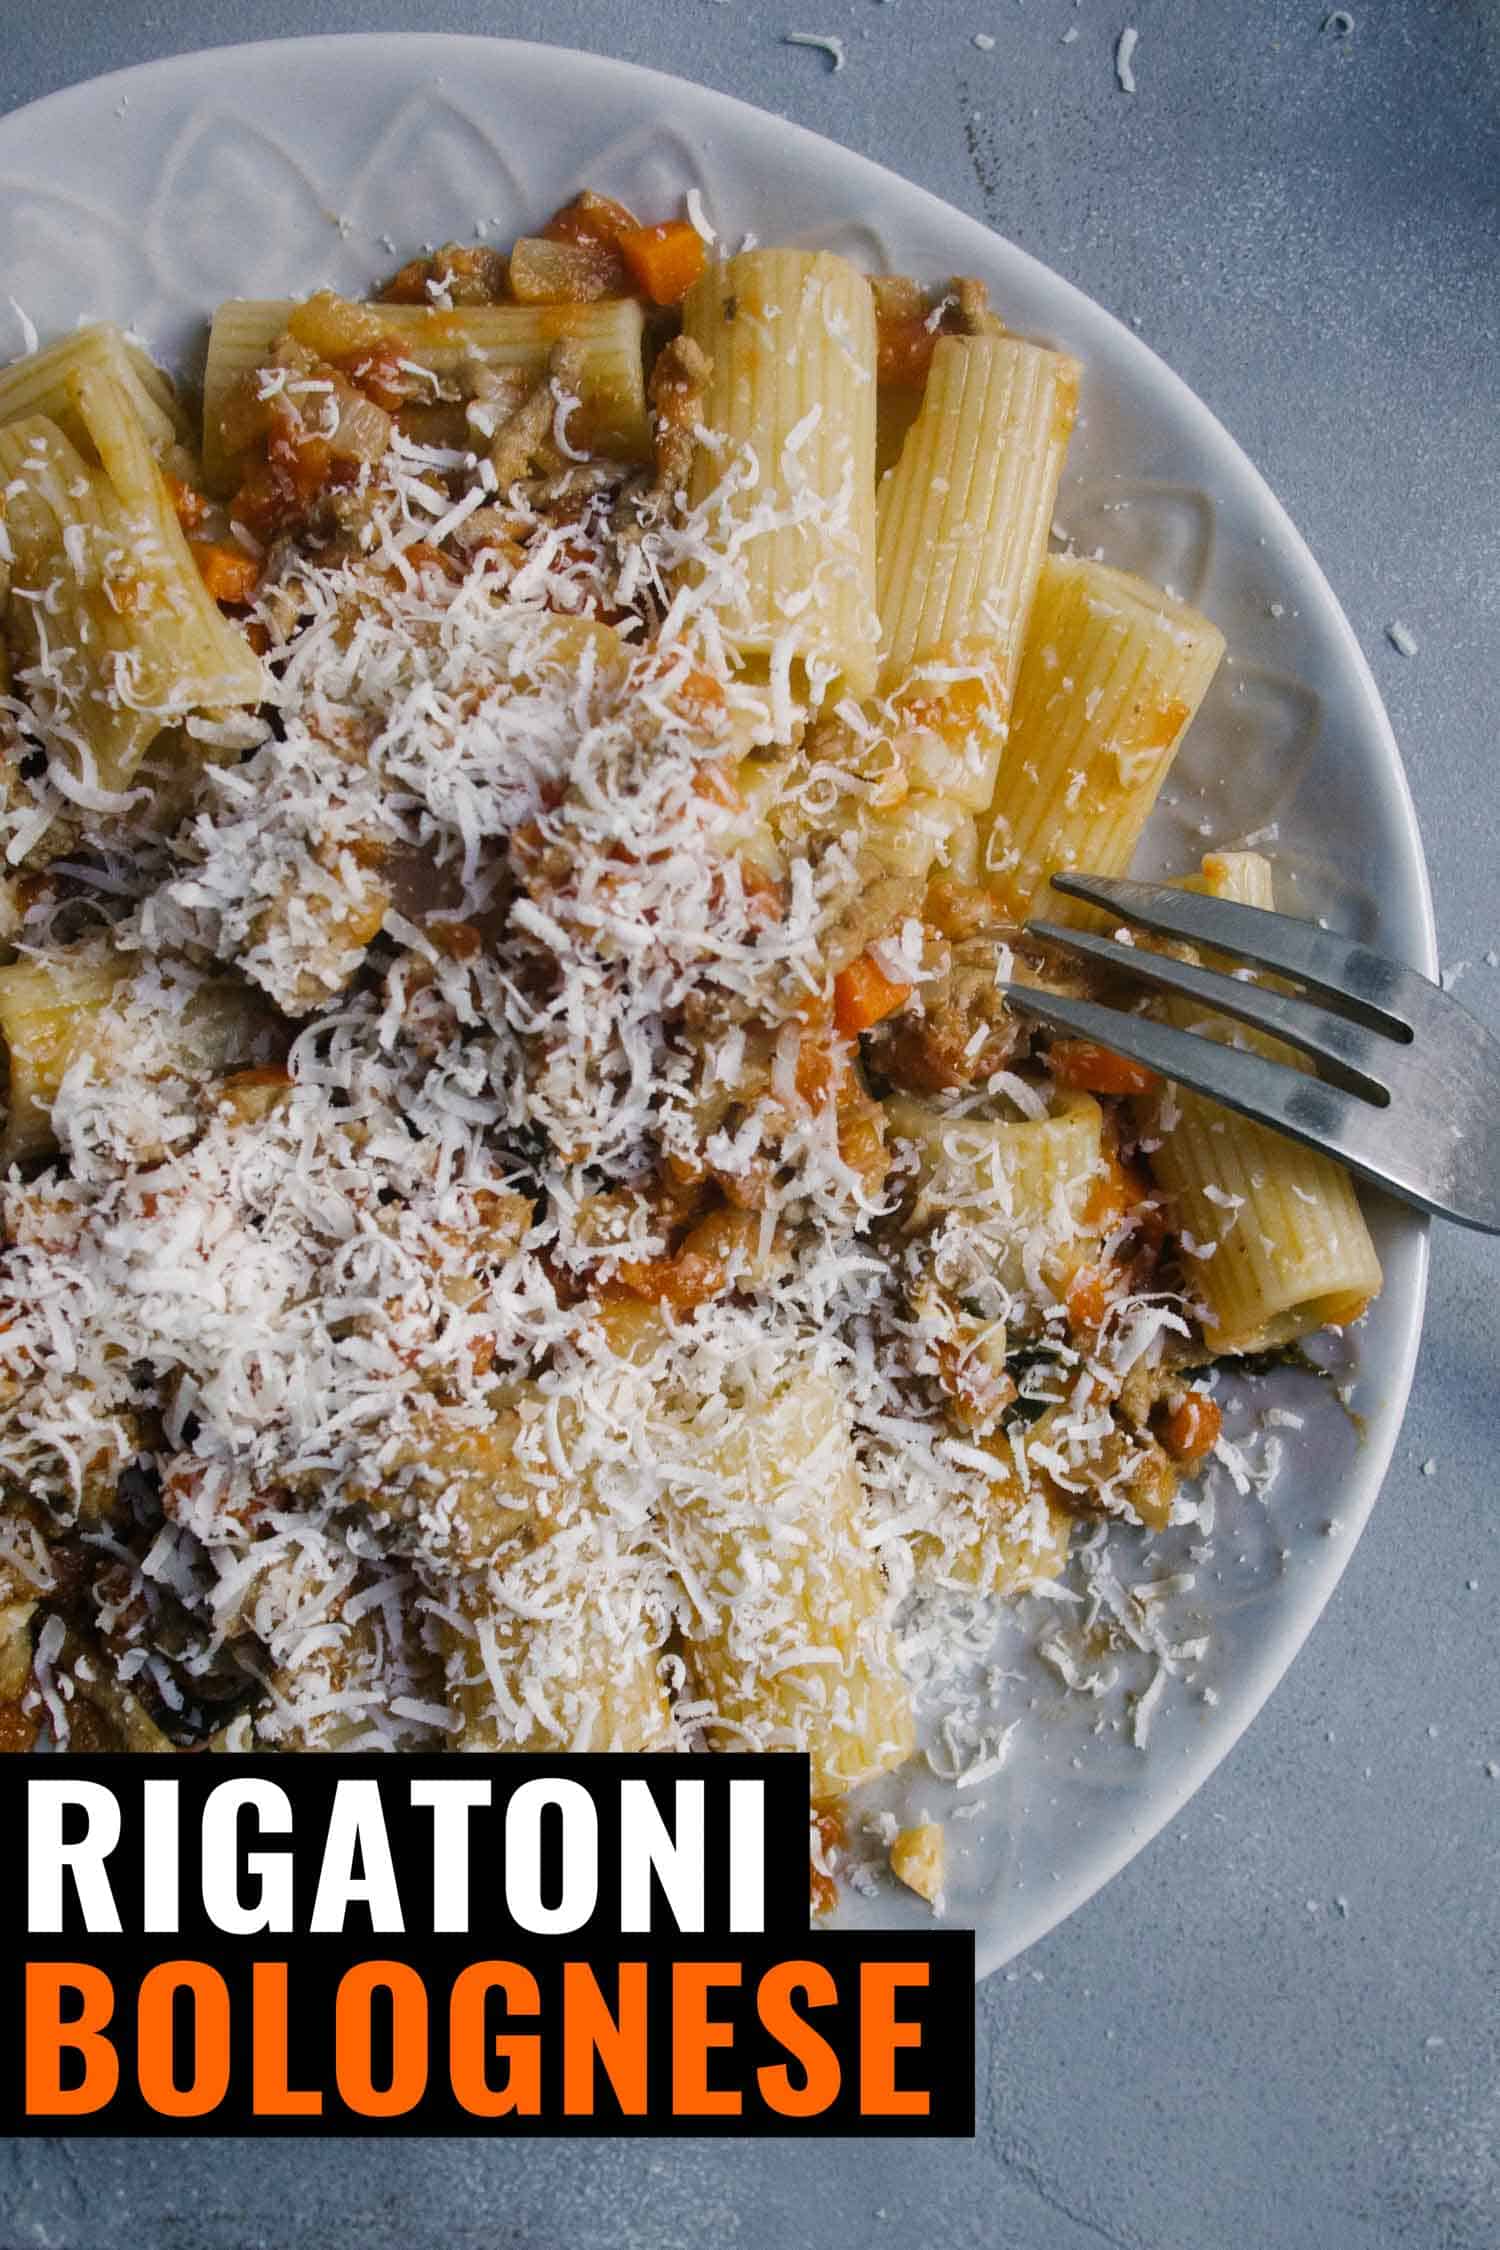 Rigatoni with a bolognese sauce on a blue background